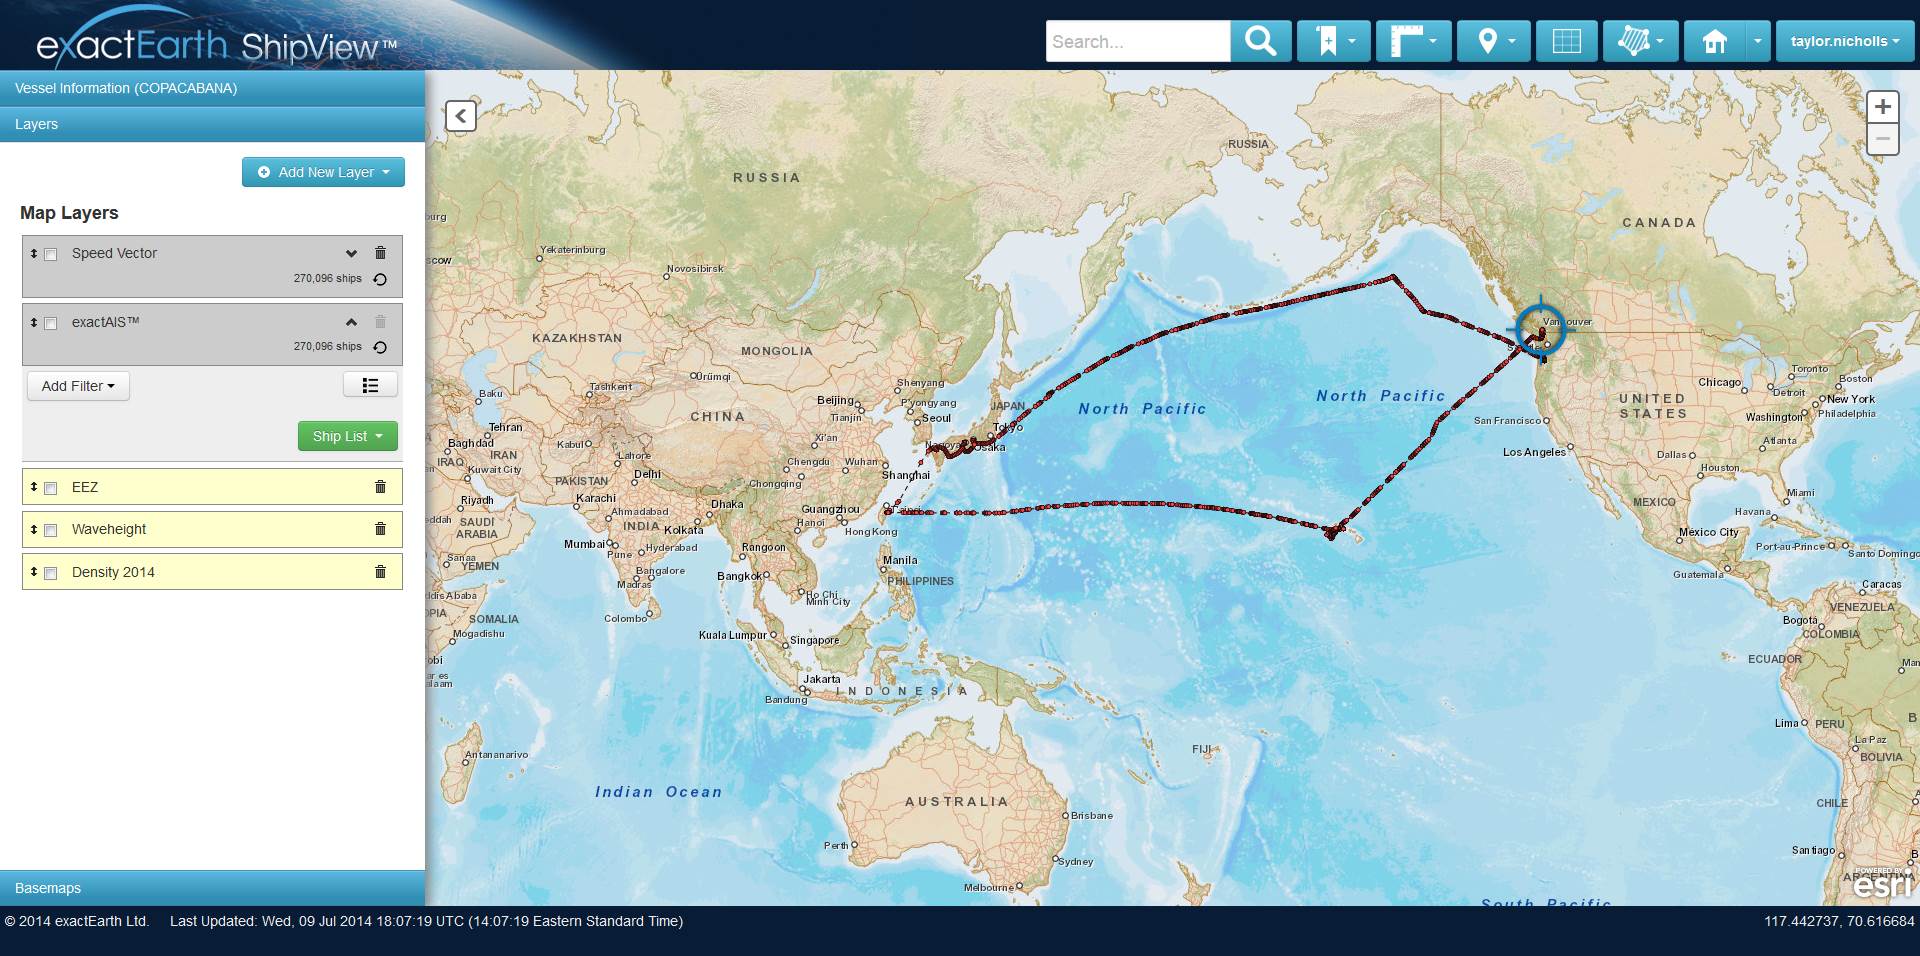 This 90-day historical track shows the exact routes taken across the Pacific. (Click to enlarge)